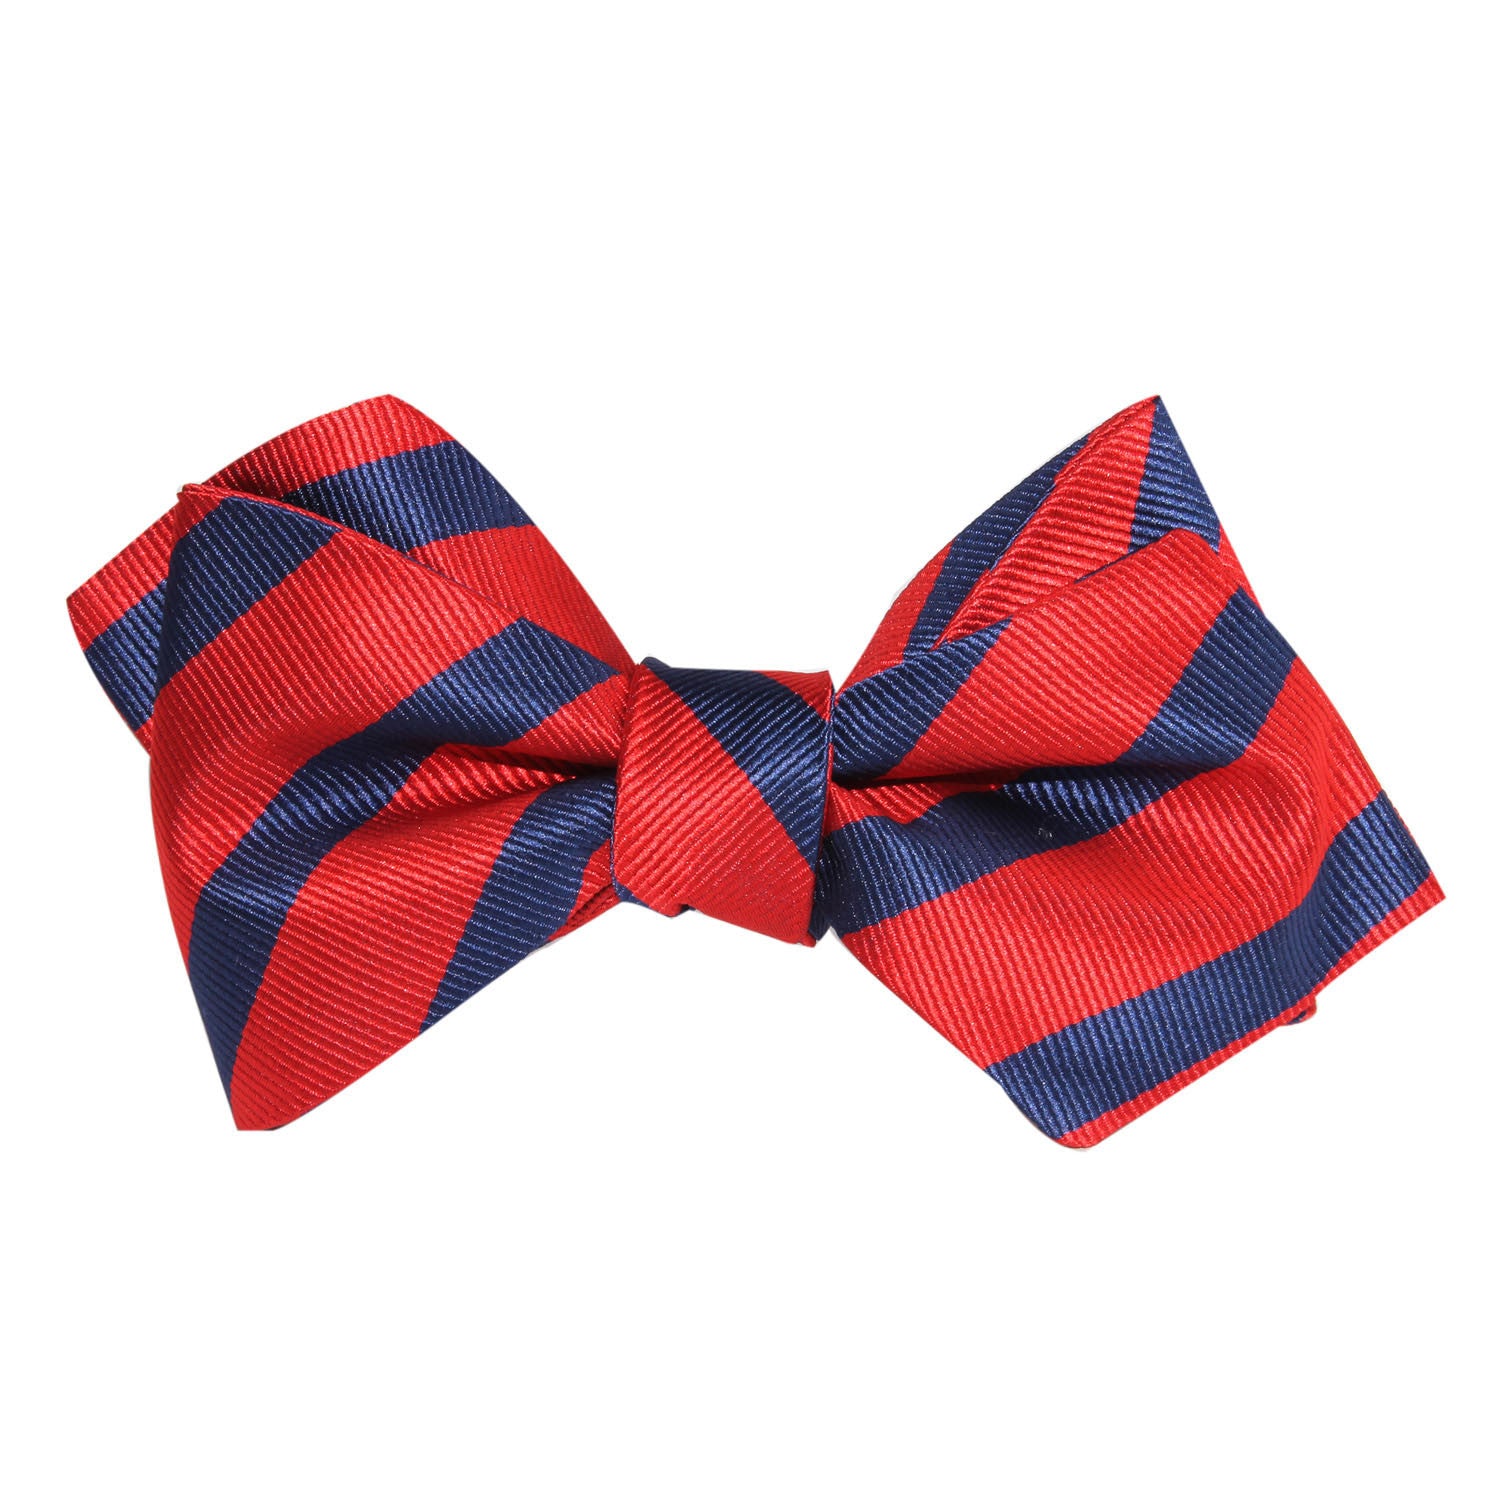 Red and Navy Blue Striped Self Tie Diamond Tip Bow Tie | Men's Bowties ...